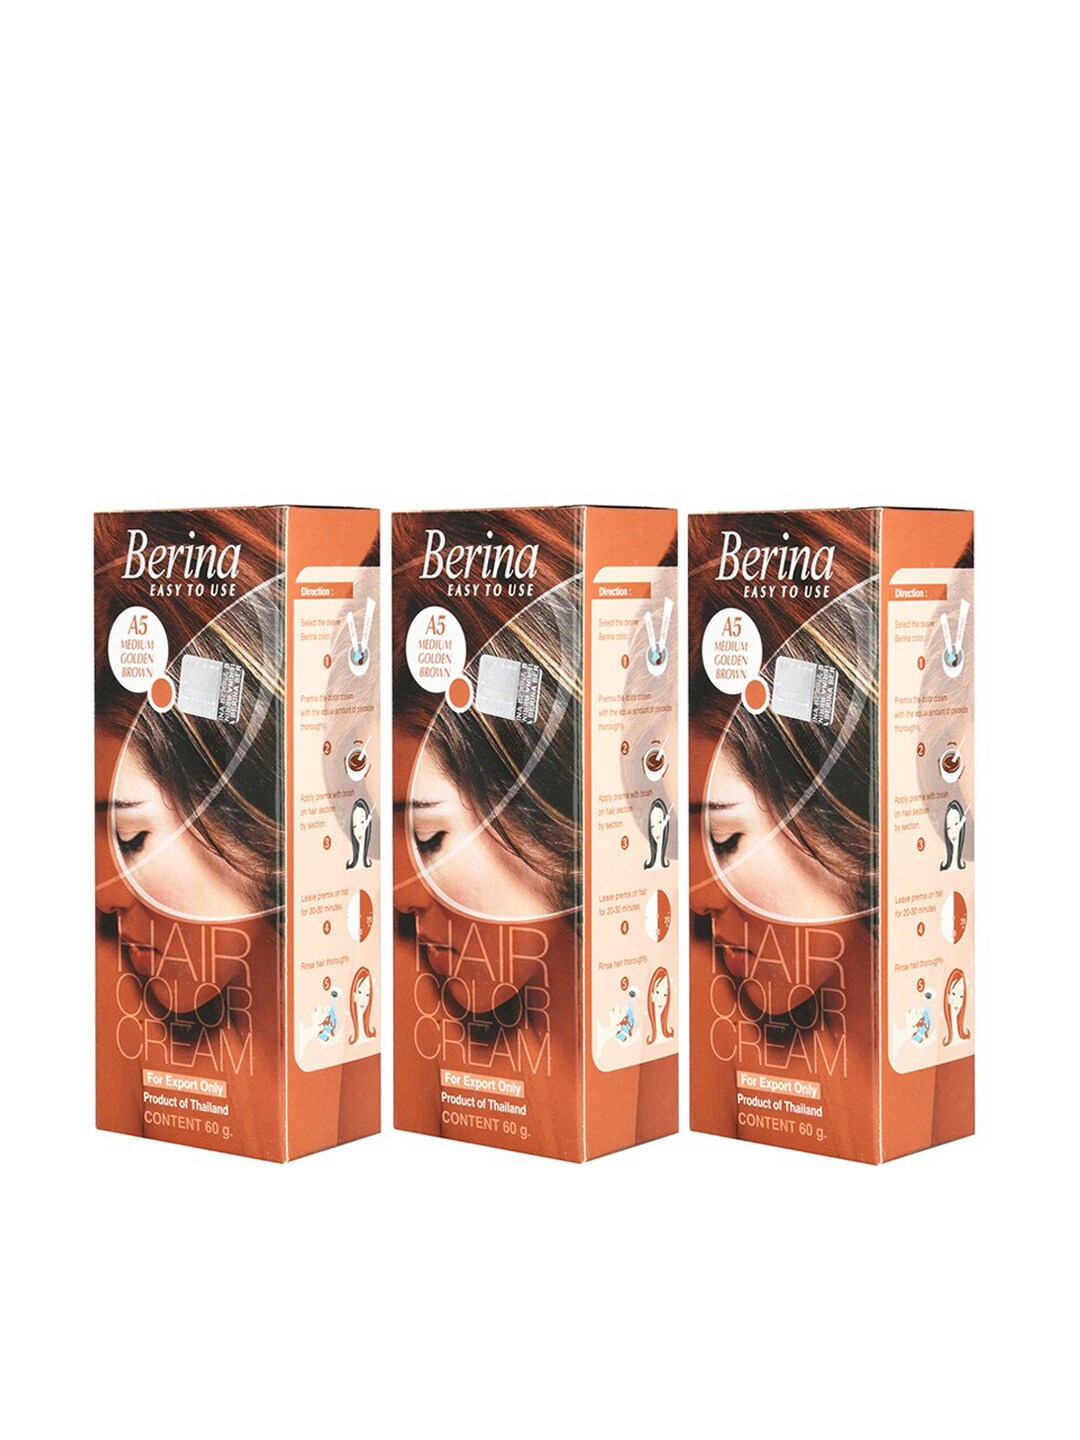 Berina Pack of 3 Hair Color Cream A5 Medium Golden Brown Price in India,  Full Specifications & Offers 